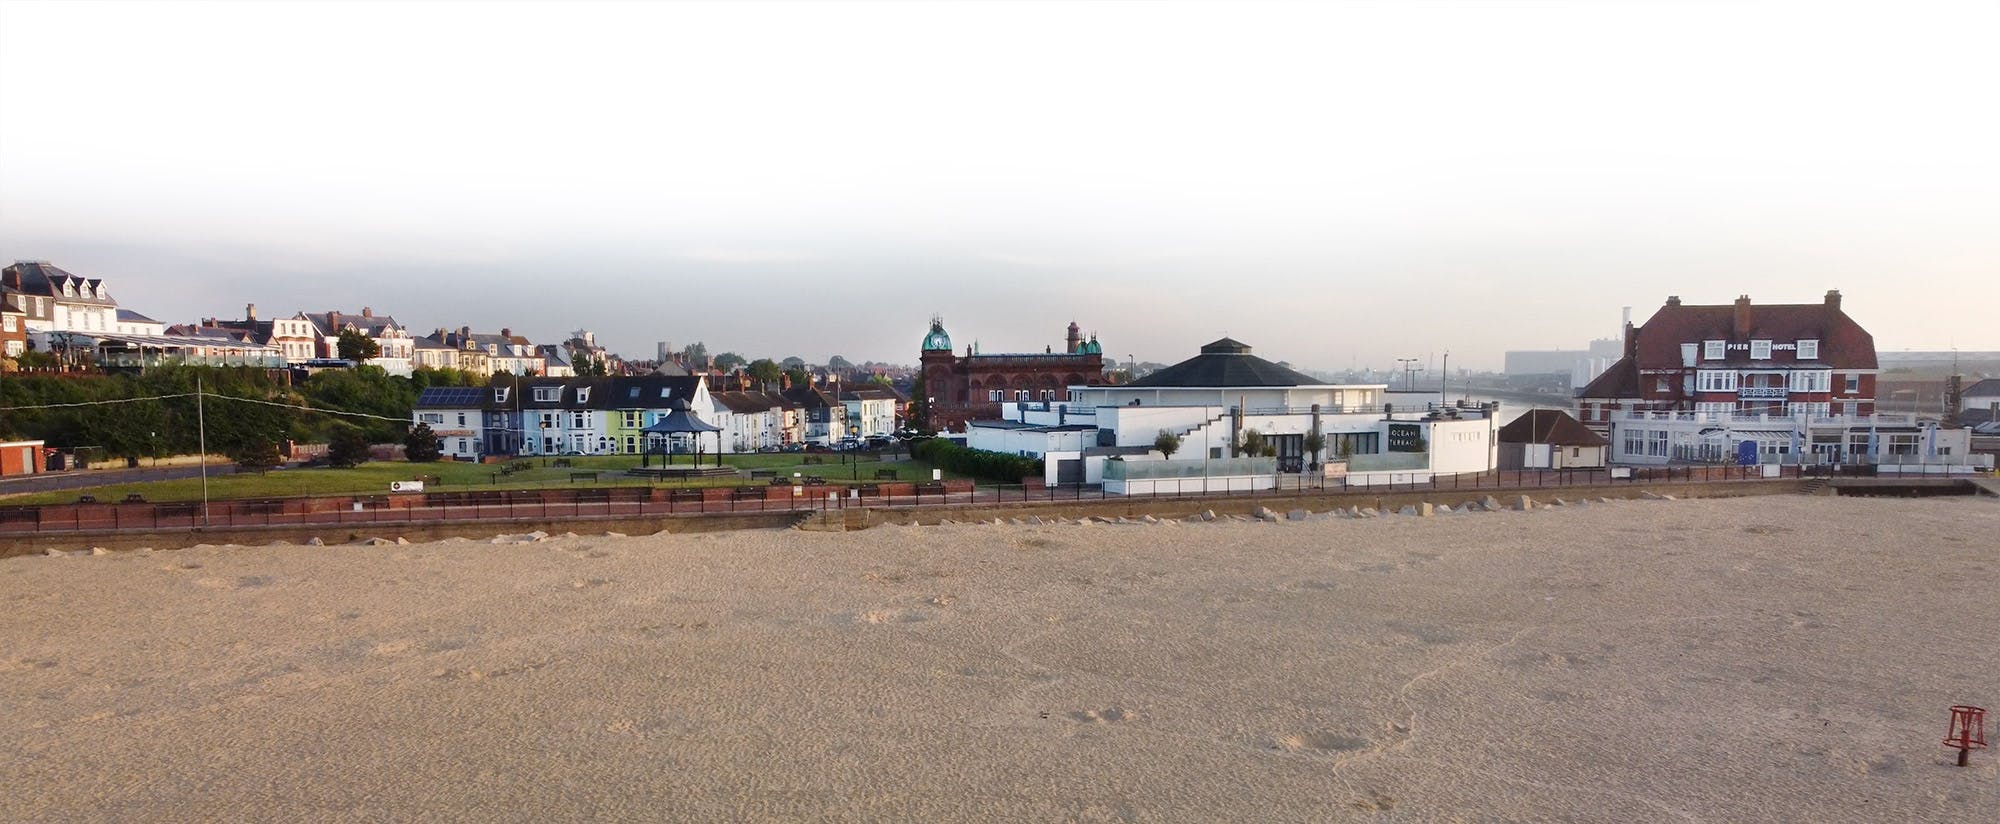 The Gorleston Pavilion Theatre, Bandstand and surrounding Ocean Room and Pier Hotel